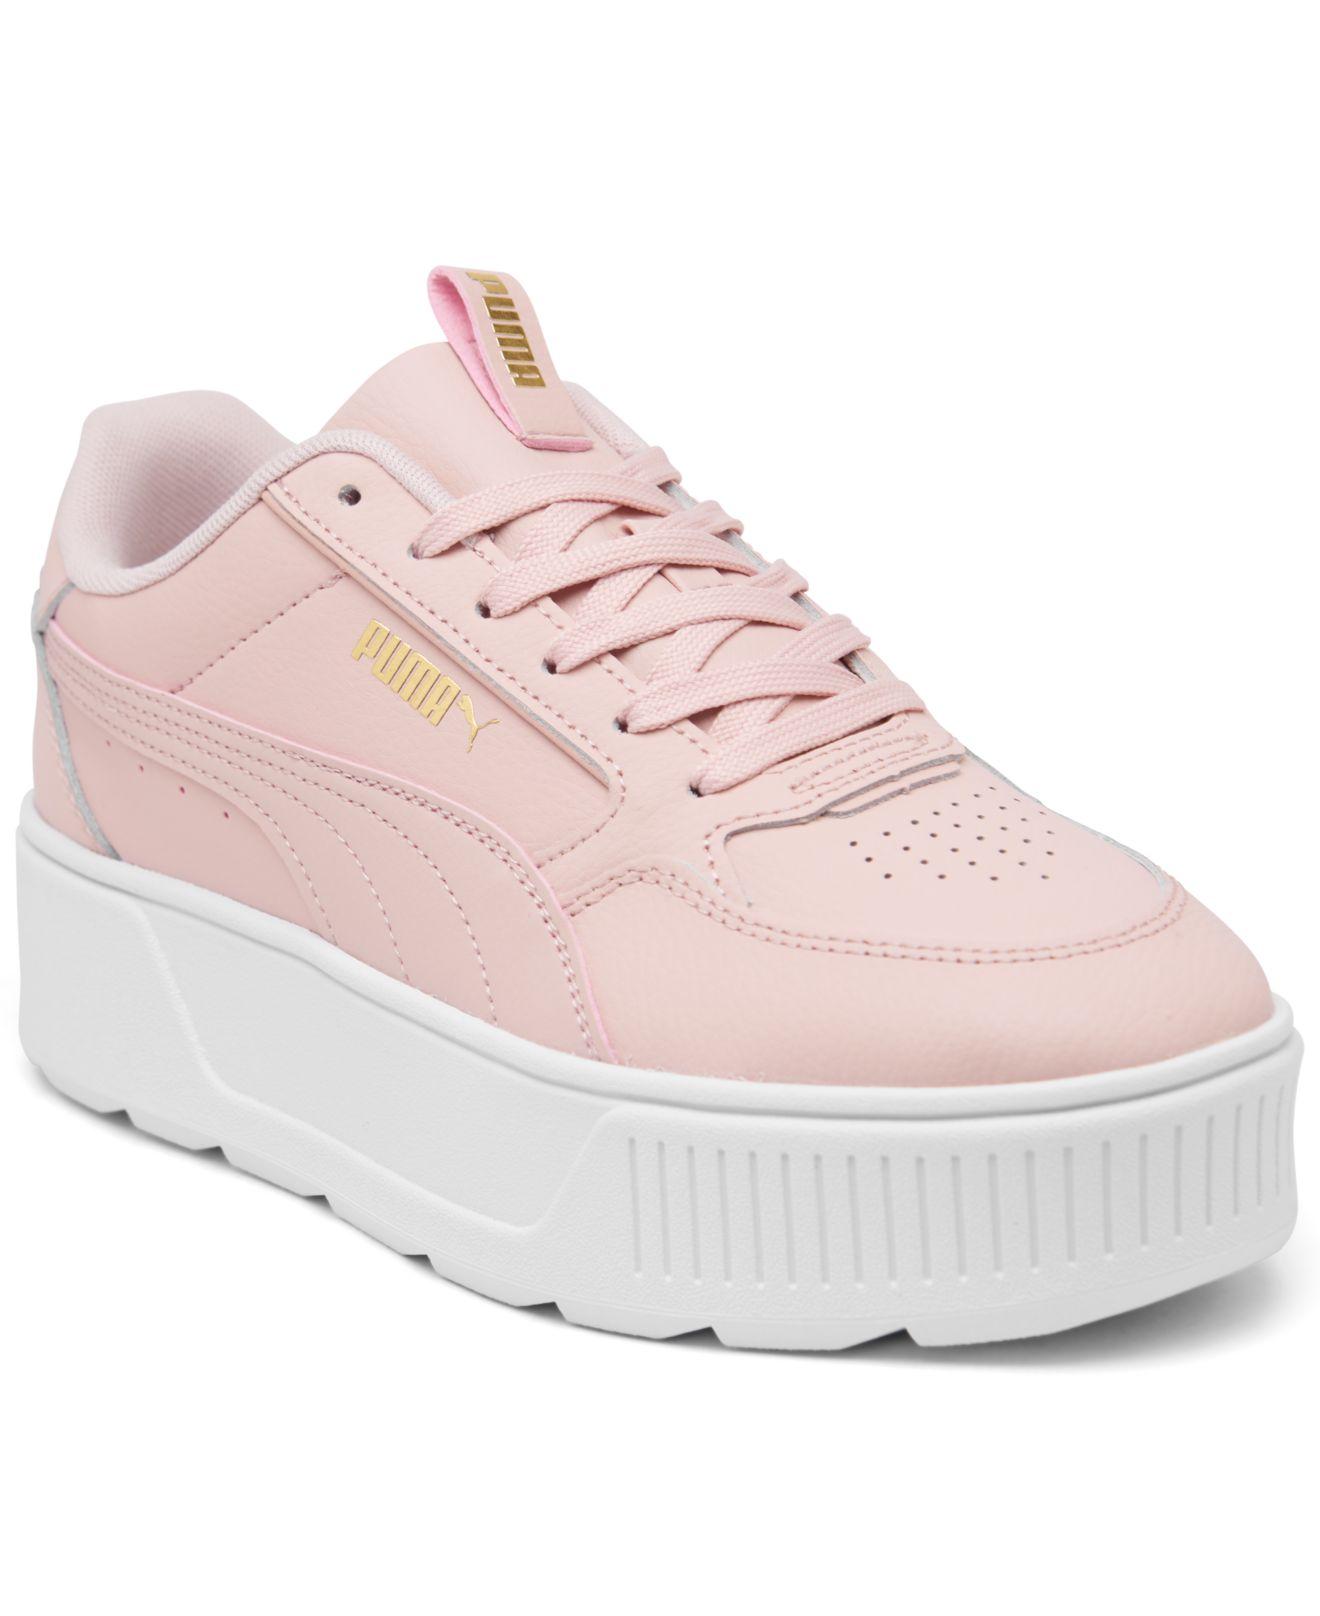 PUMA Karmen Rebelle Casual Sneakers From Finish Line in Pink | Lyst